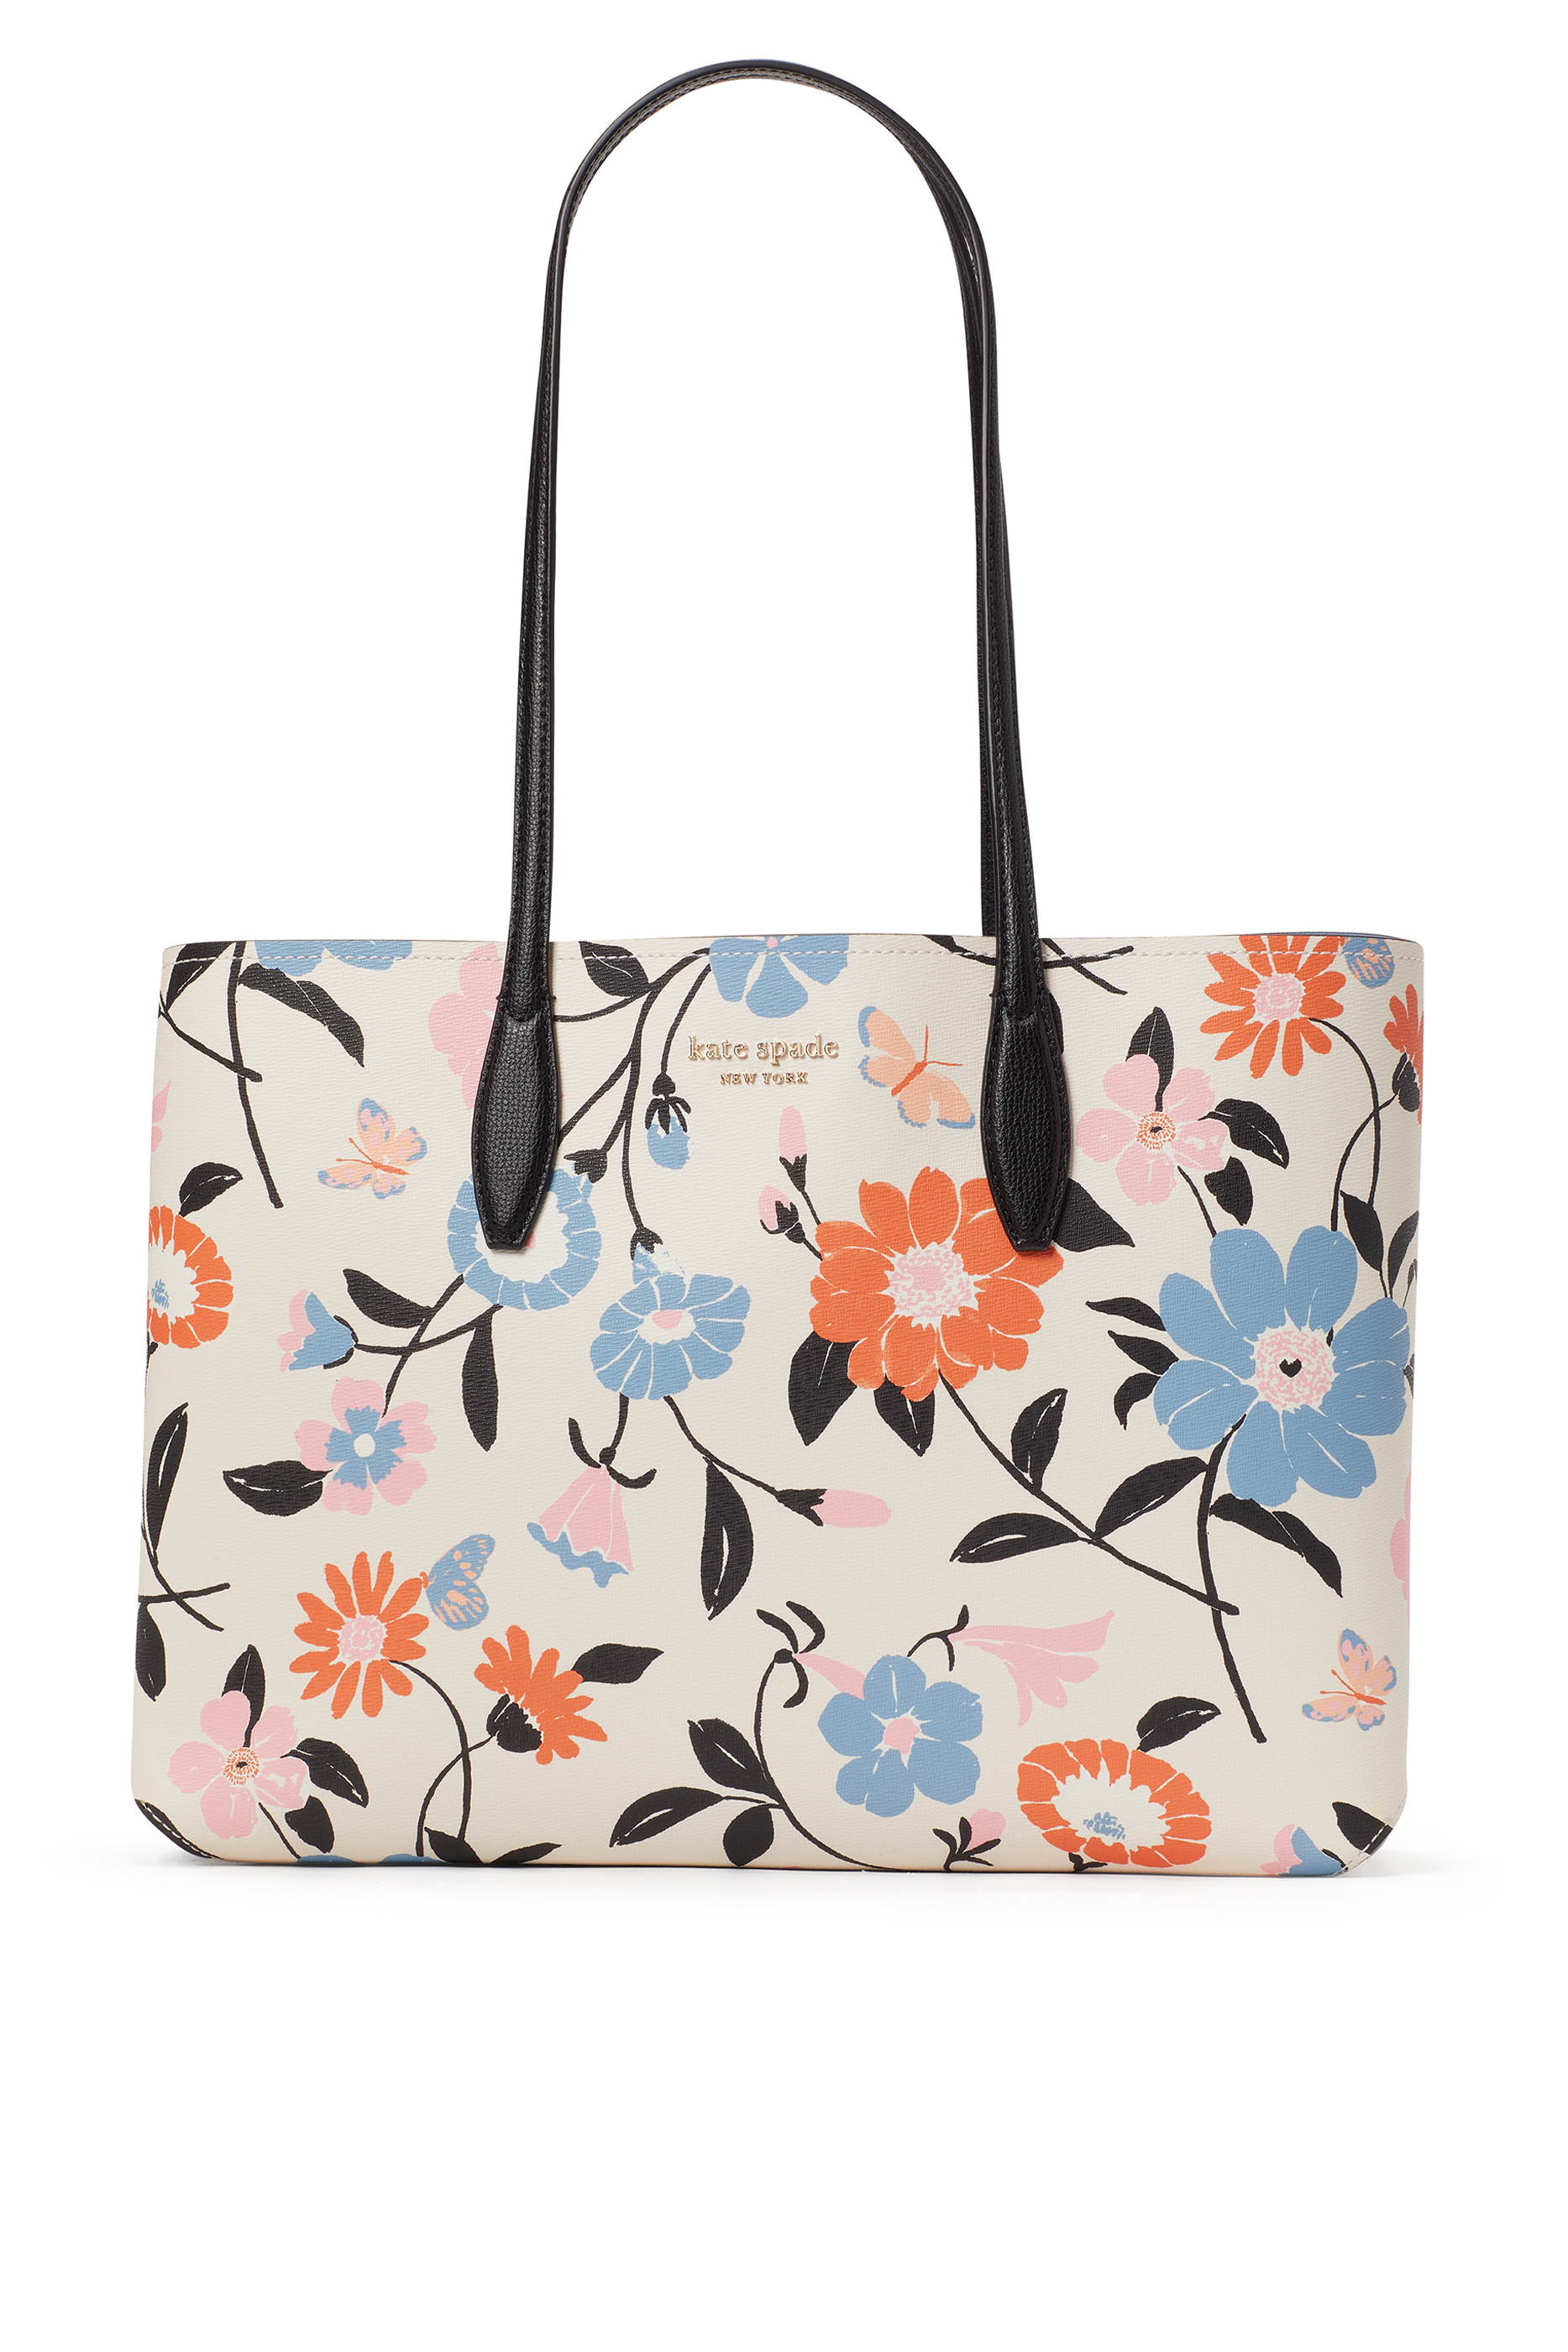 Kate Spade All Day Flower Bed Tote Bag - Farfetch